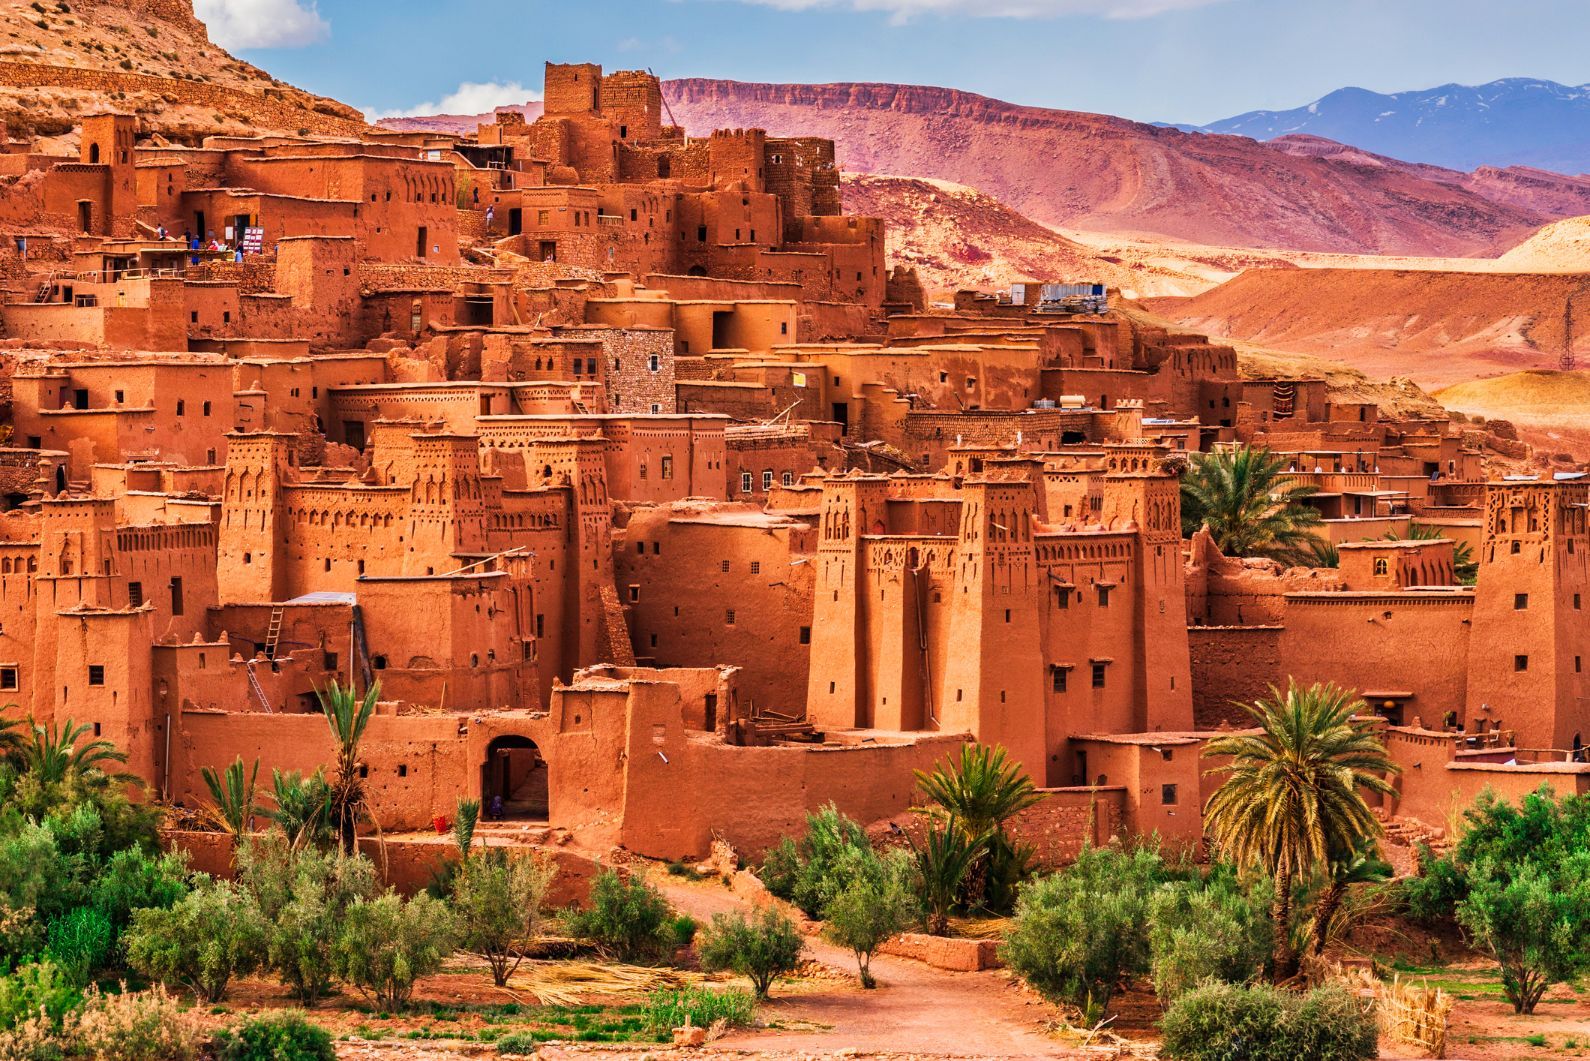 Ait Benhaddou, an ancient city in Morocco